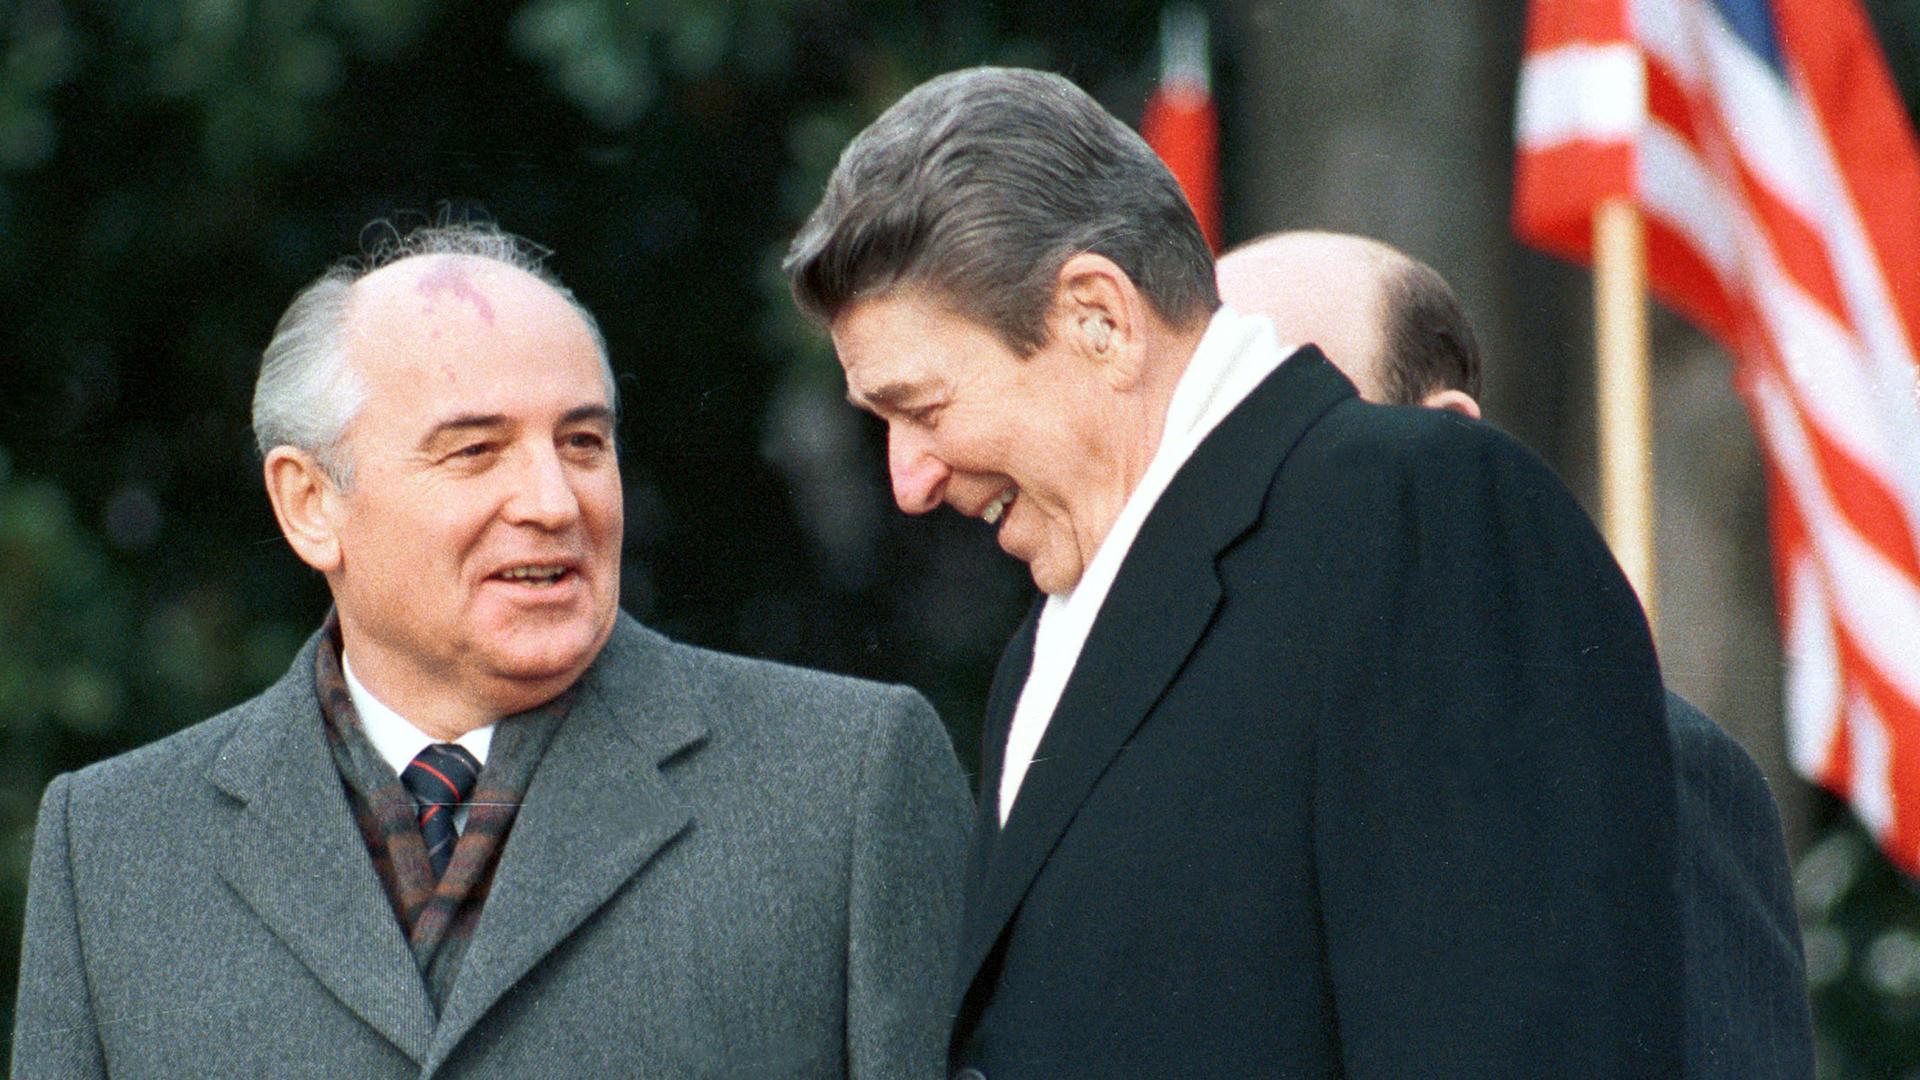 Former U.S. President Ronald Reagan (R) stands with former Soviet leader Mikhail Gorbachev (L) during Gorbachev's arrival ceremony at the White House in Washington, December 8, 1987.